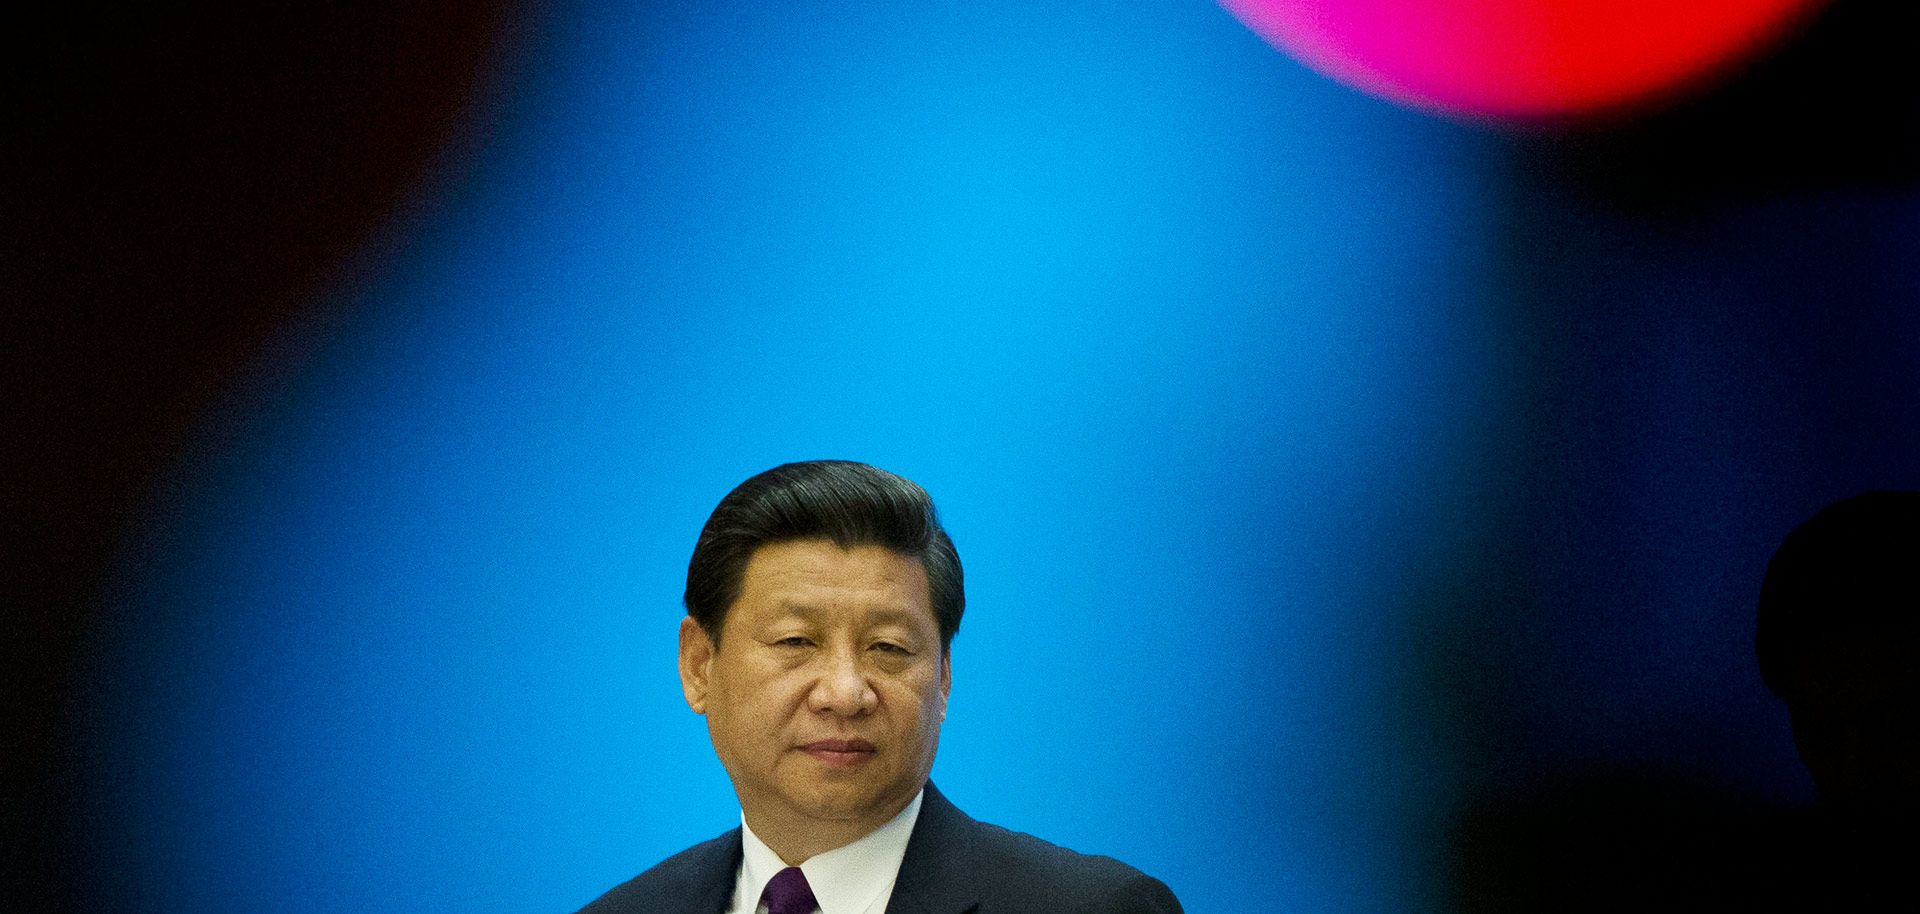 Chinese President Xi Jinping's harsh clampdown on any form of protest suggests that authorities are concerned about dissent building in the country.